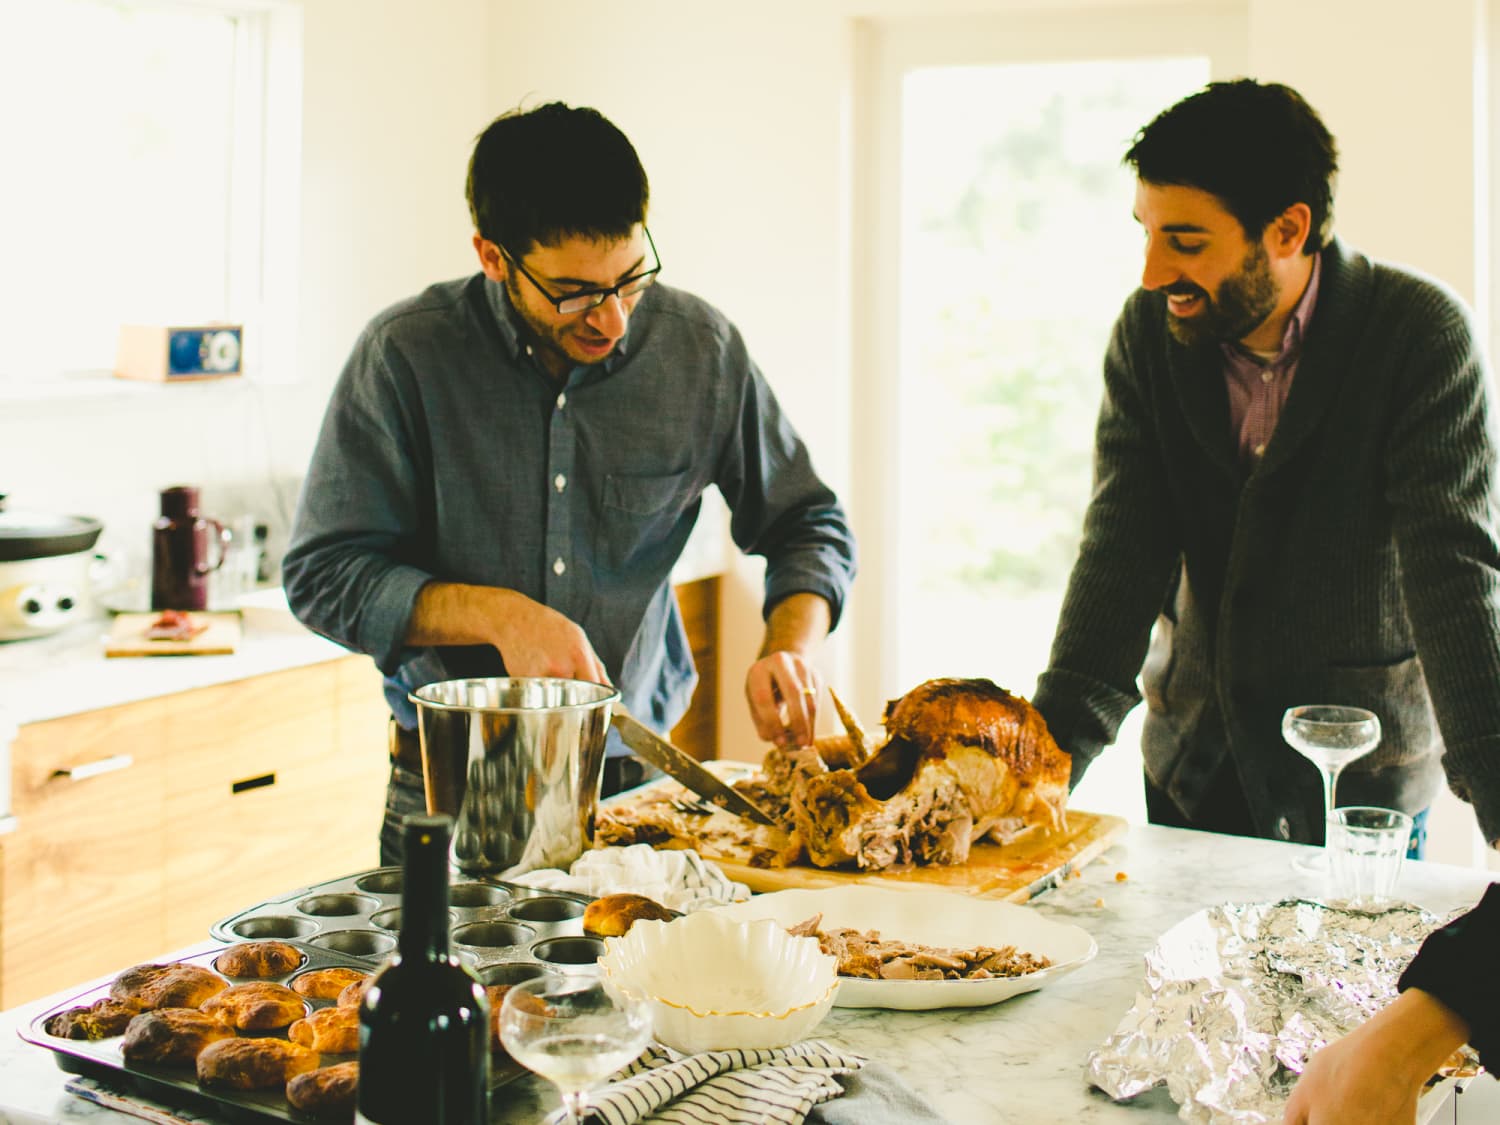 10 Tips for Hosting Thanksgiving: What I've Learned in the Past 5